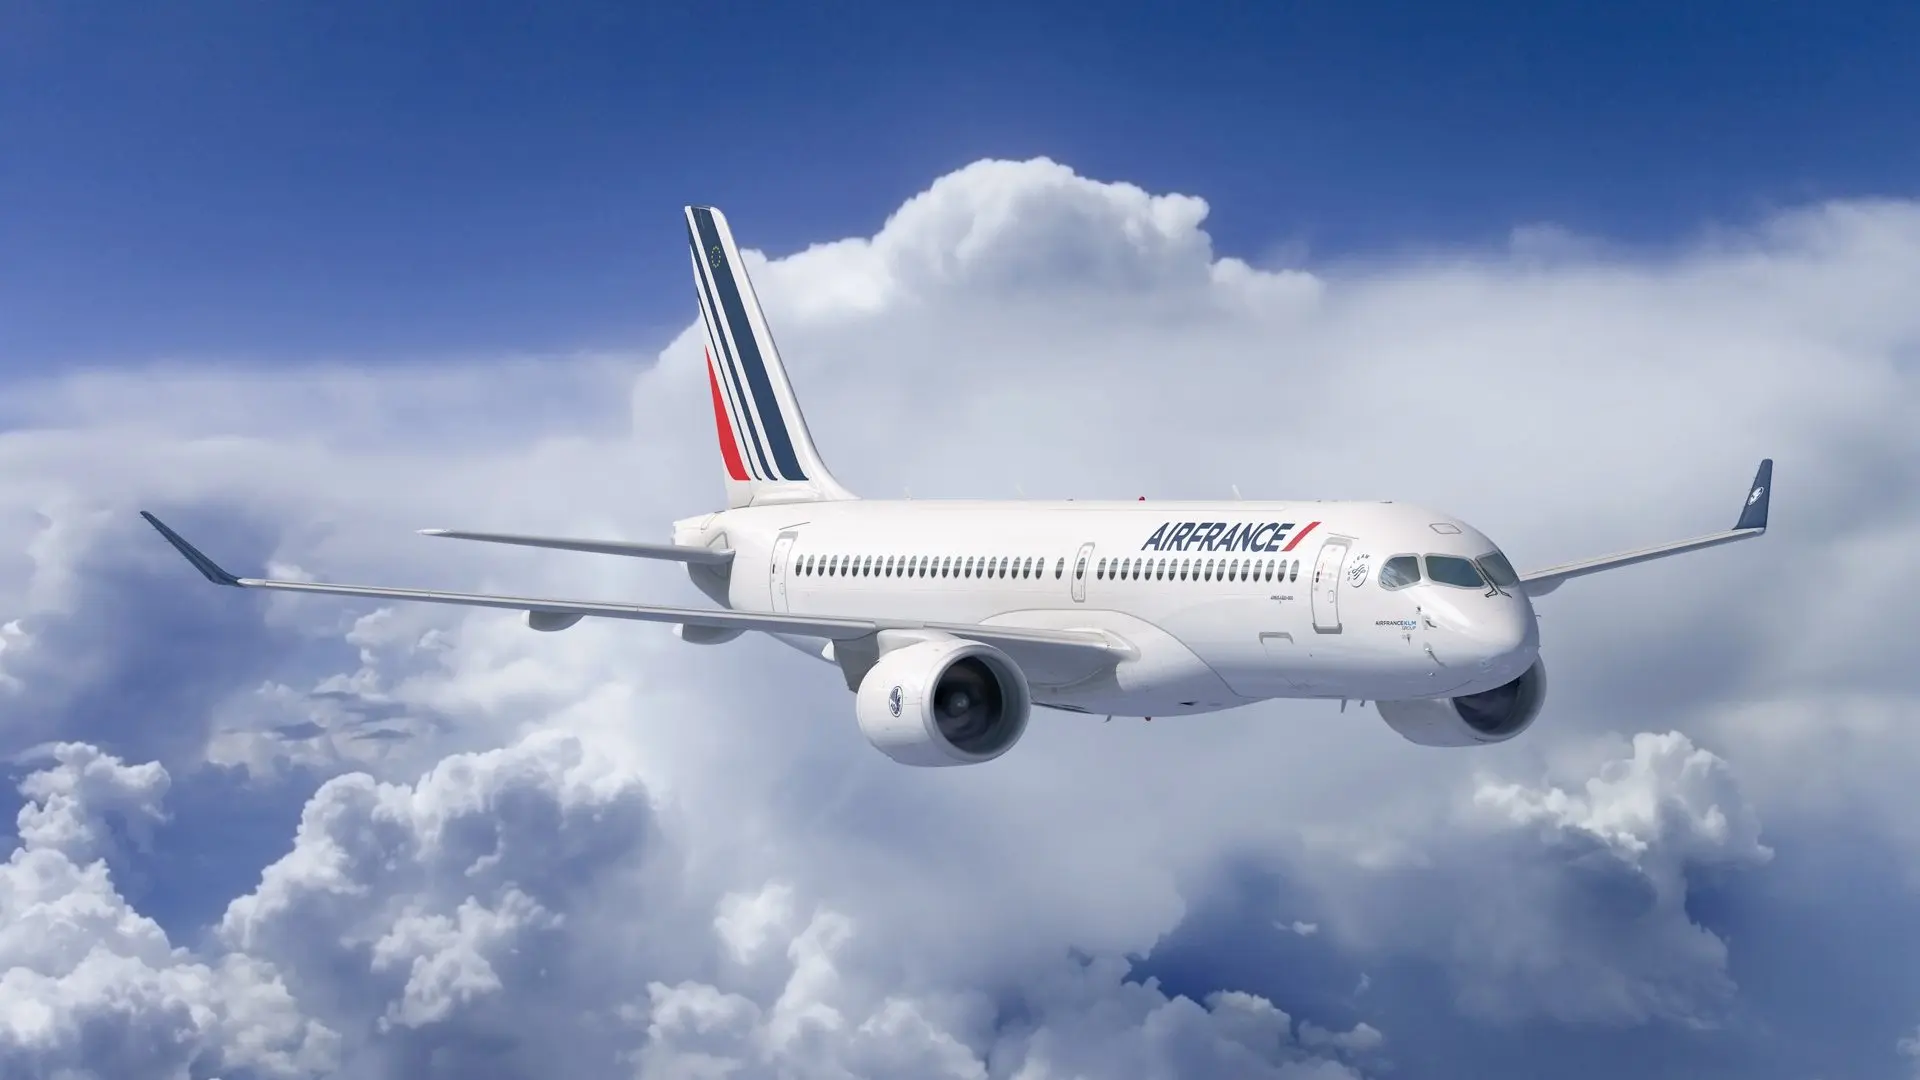 Airlines Articles - Air France unveils its new Business Class lounge at Paris-Charles de Gaulle